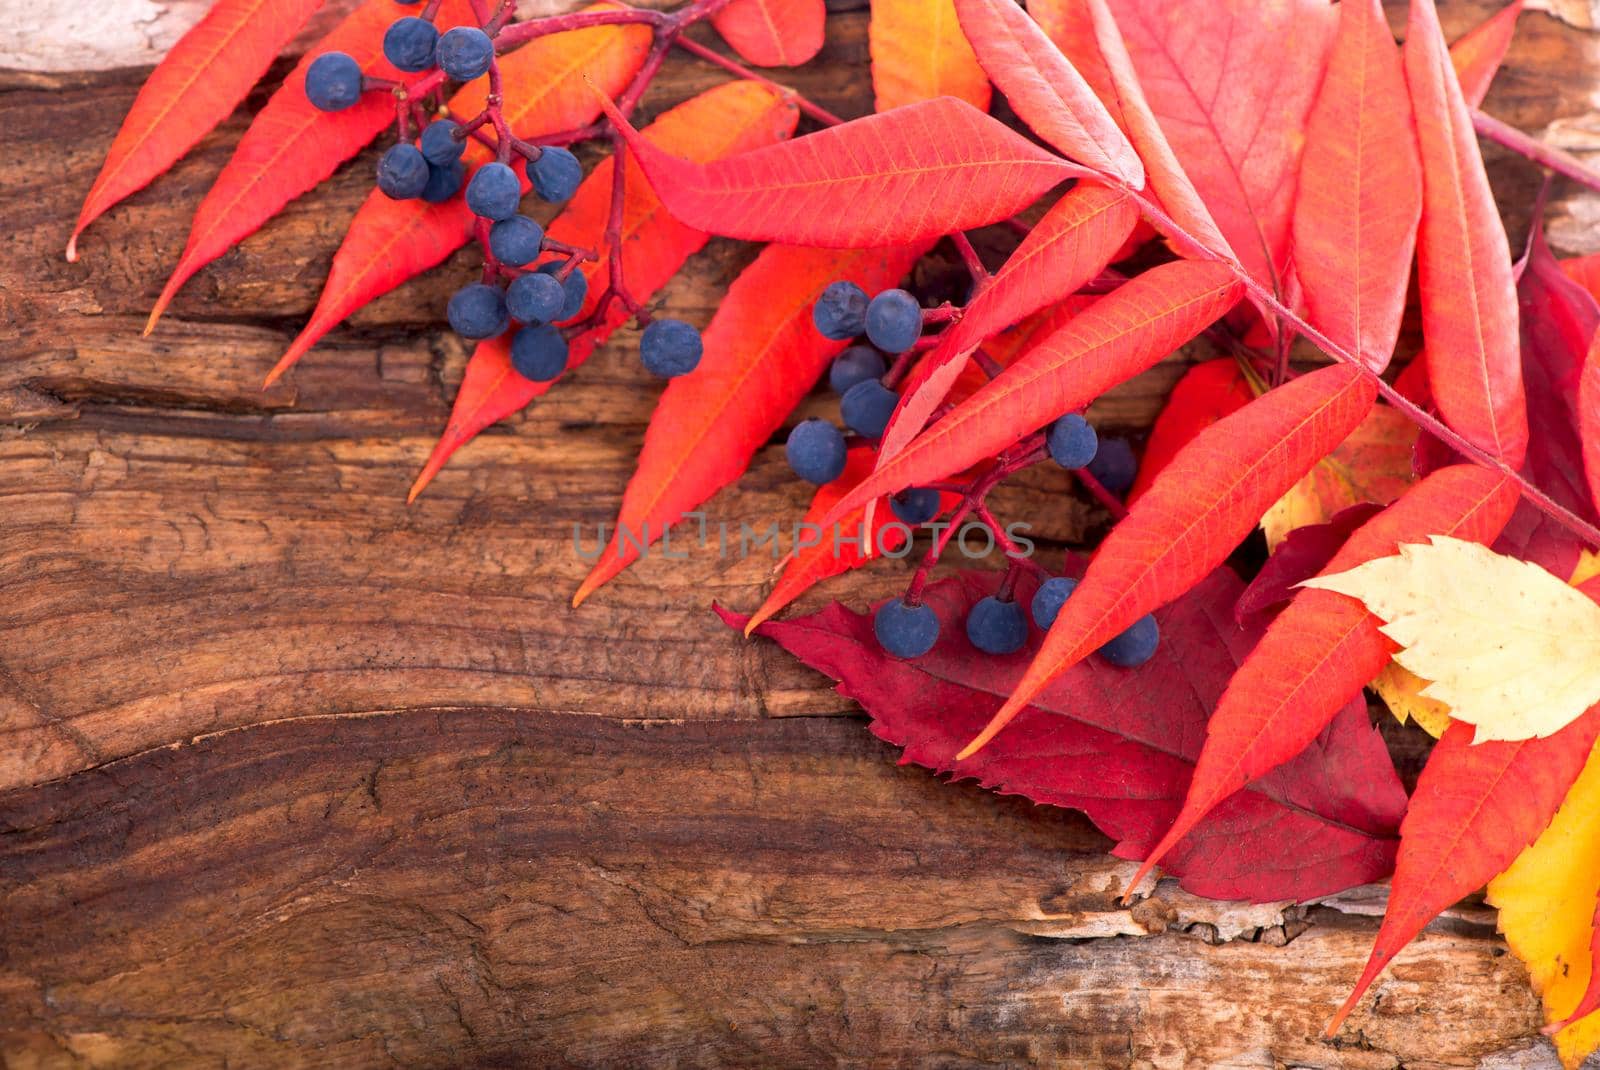 autumn background with colored leaves on wooden board.